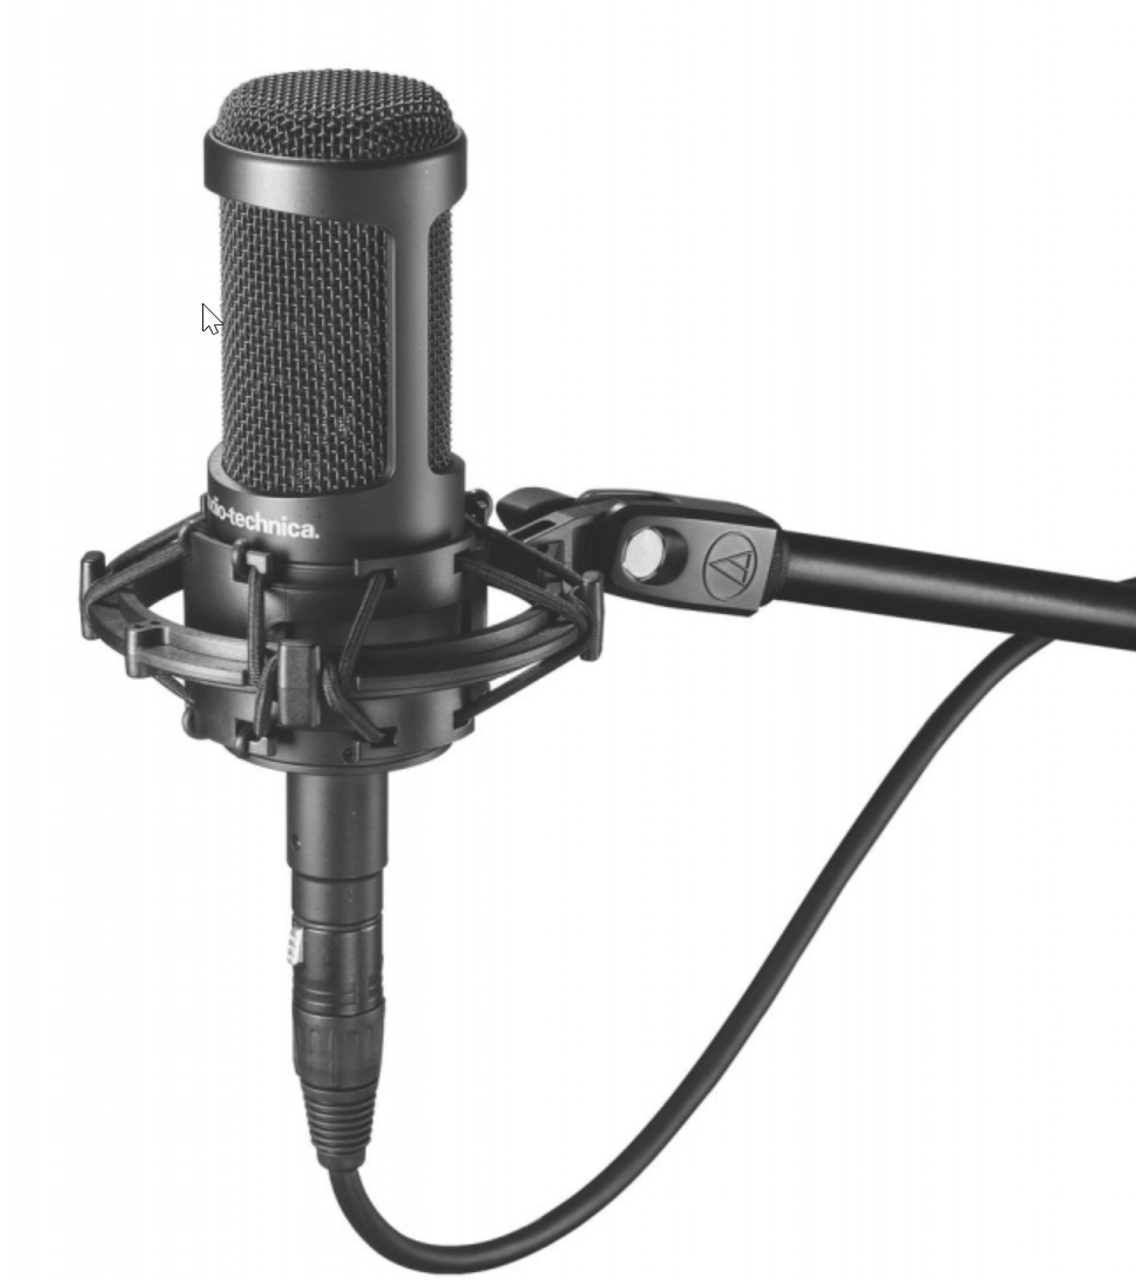 AT2035 Cardioid Condenser Microphone